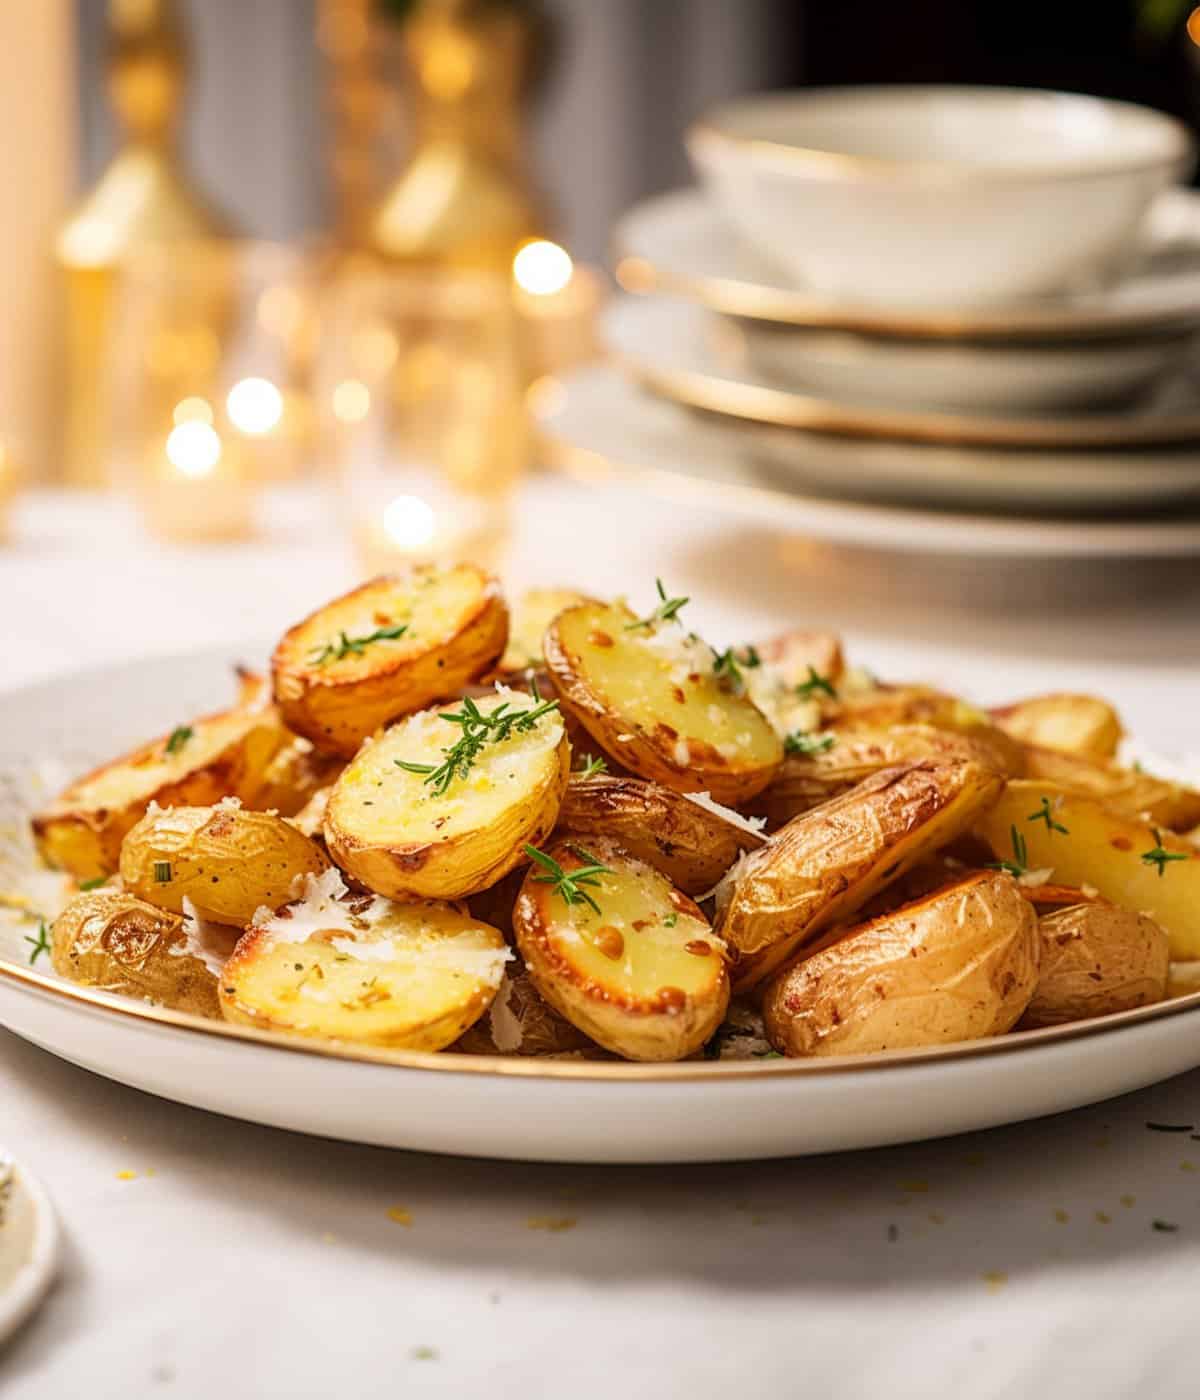 A side view of the roasted potatoes, highlighting the crispy parmesan crust.